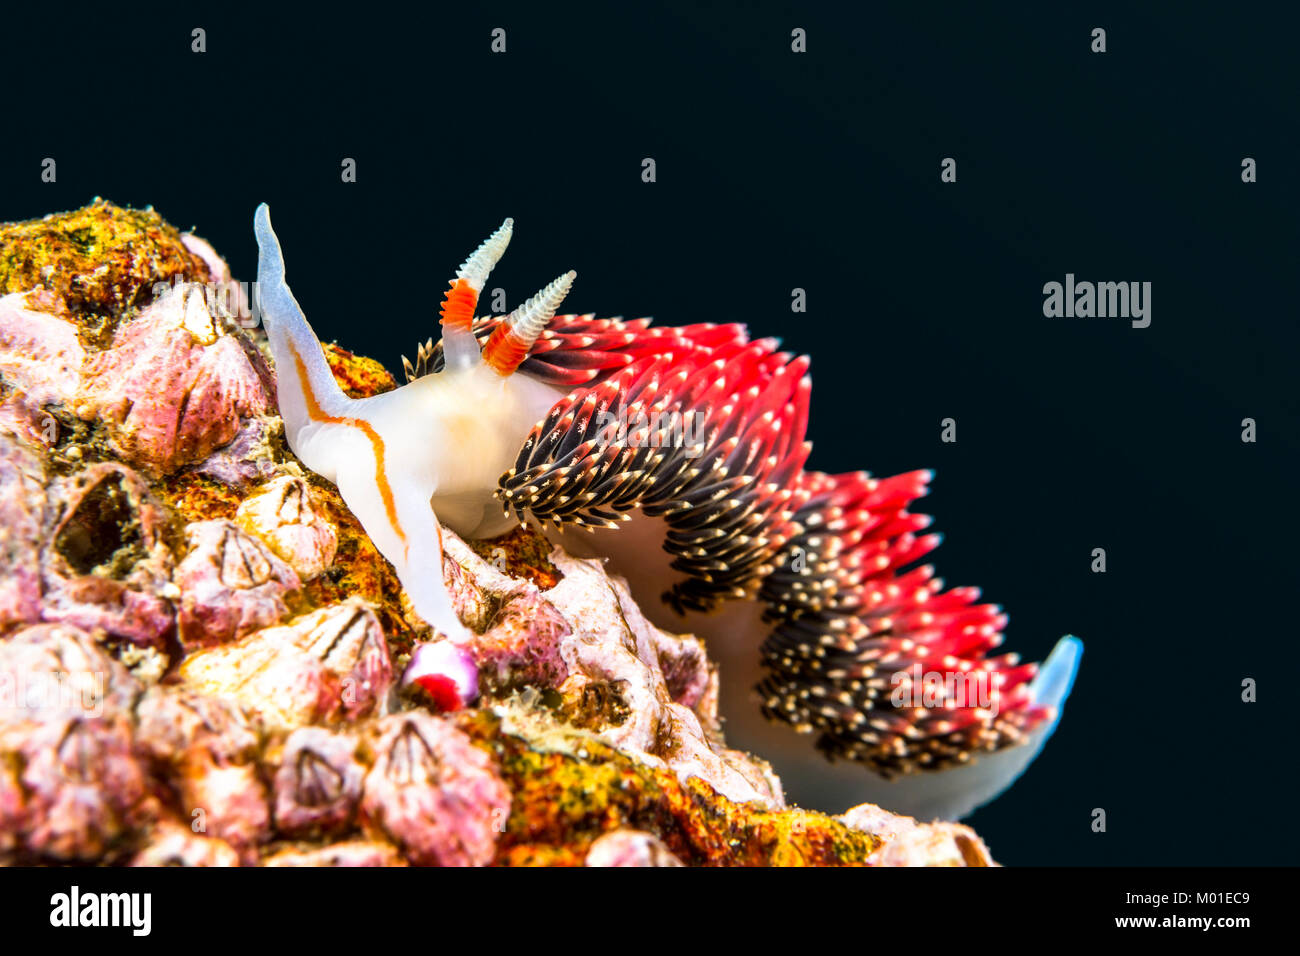 An underwater snail called Hilton's aeolid crawls on a reef in California's Channel Islands Stock Photo